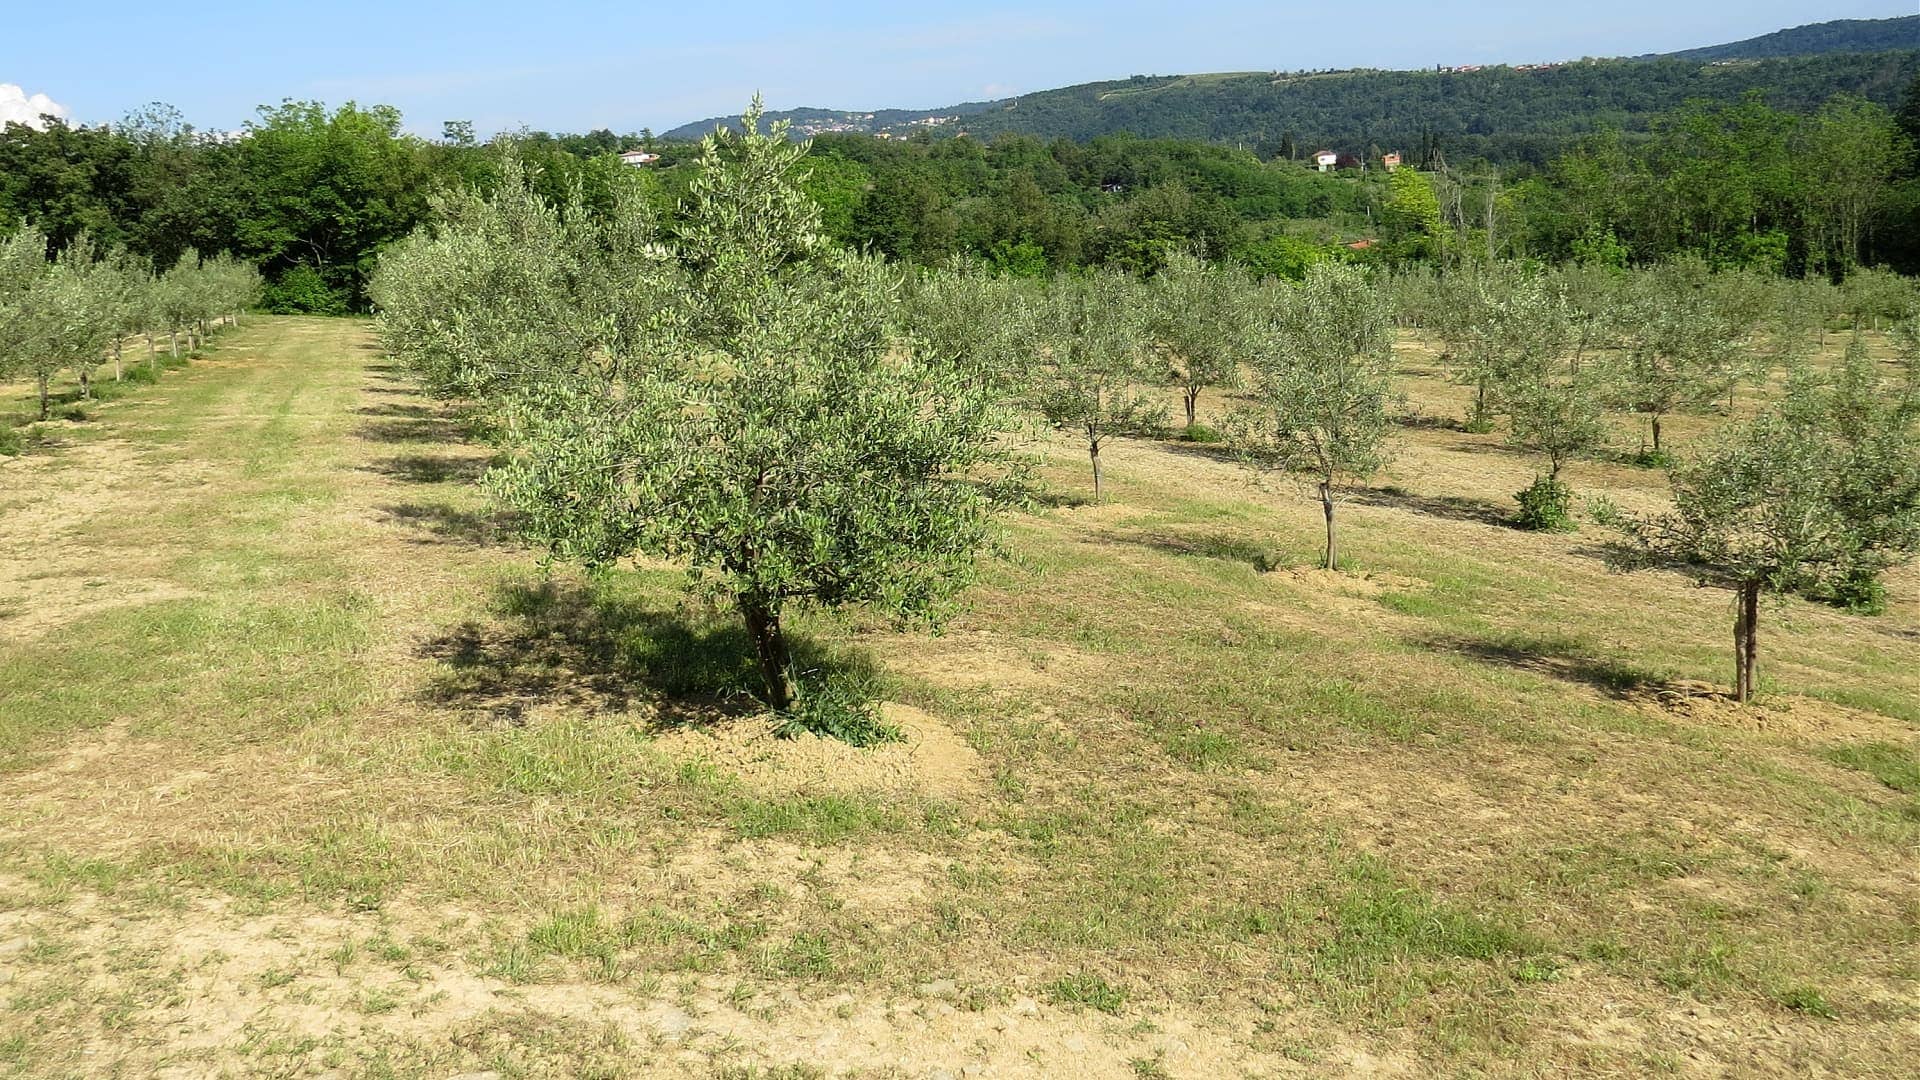 profiles-production-in-slovenia-a-fruitful-harvest-despite-drought-pests-olive-oil-times